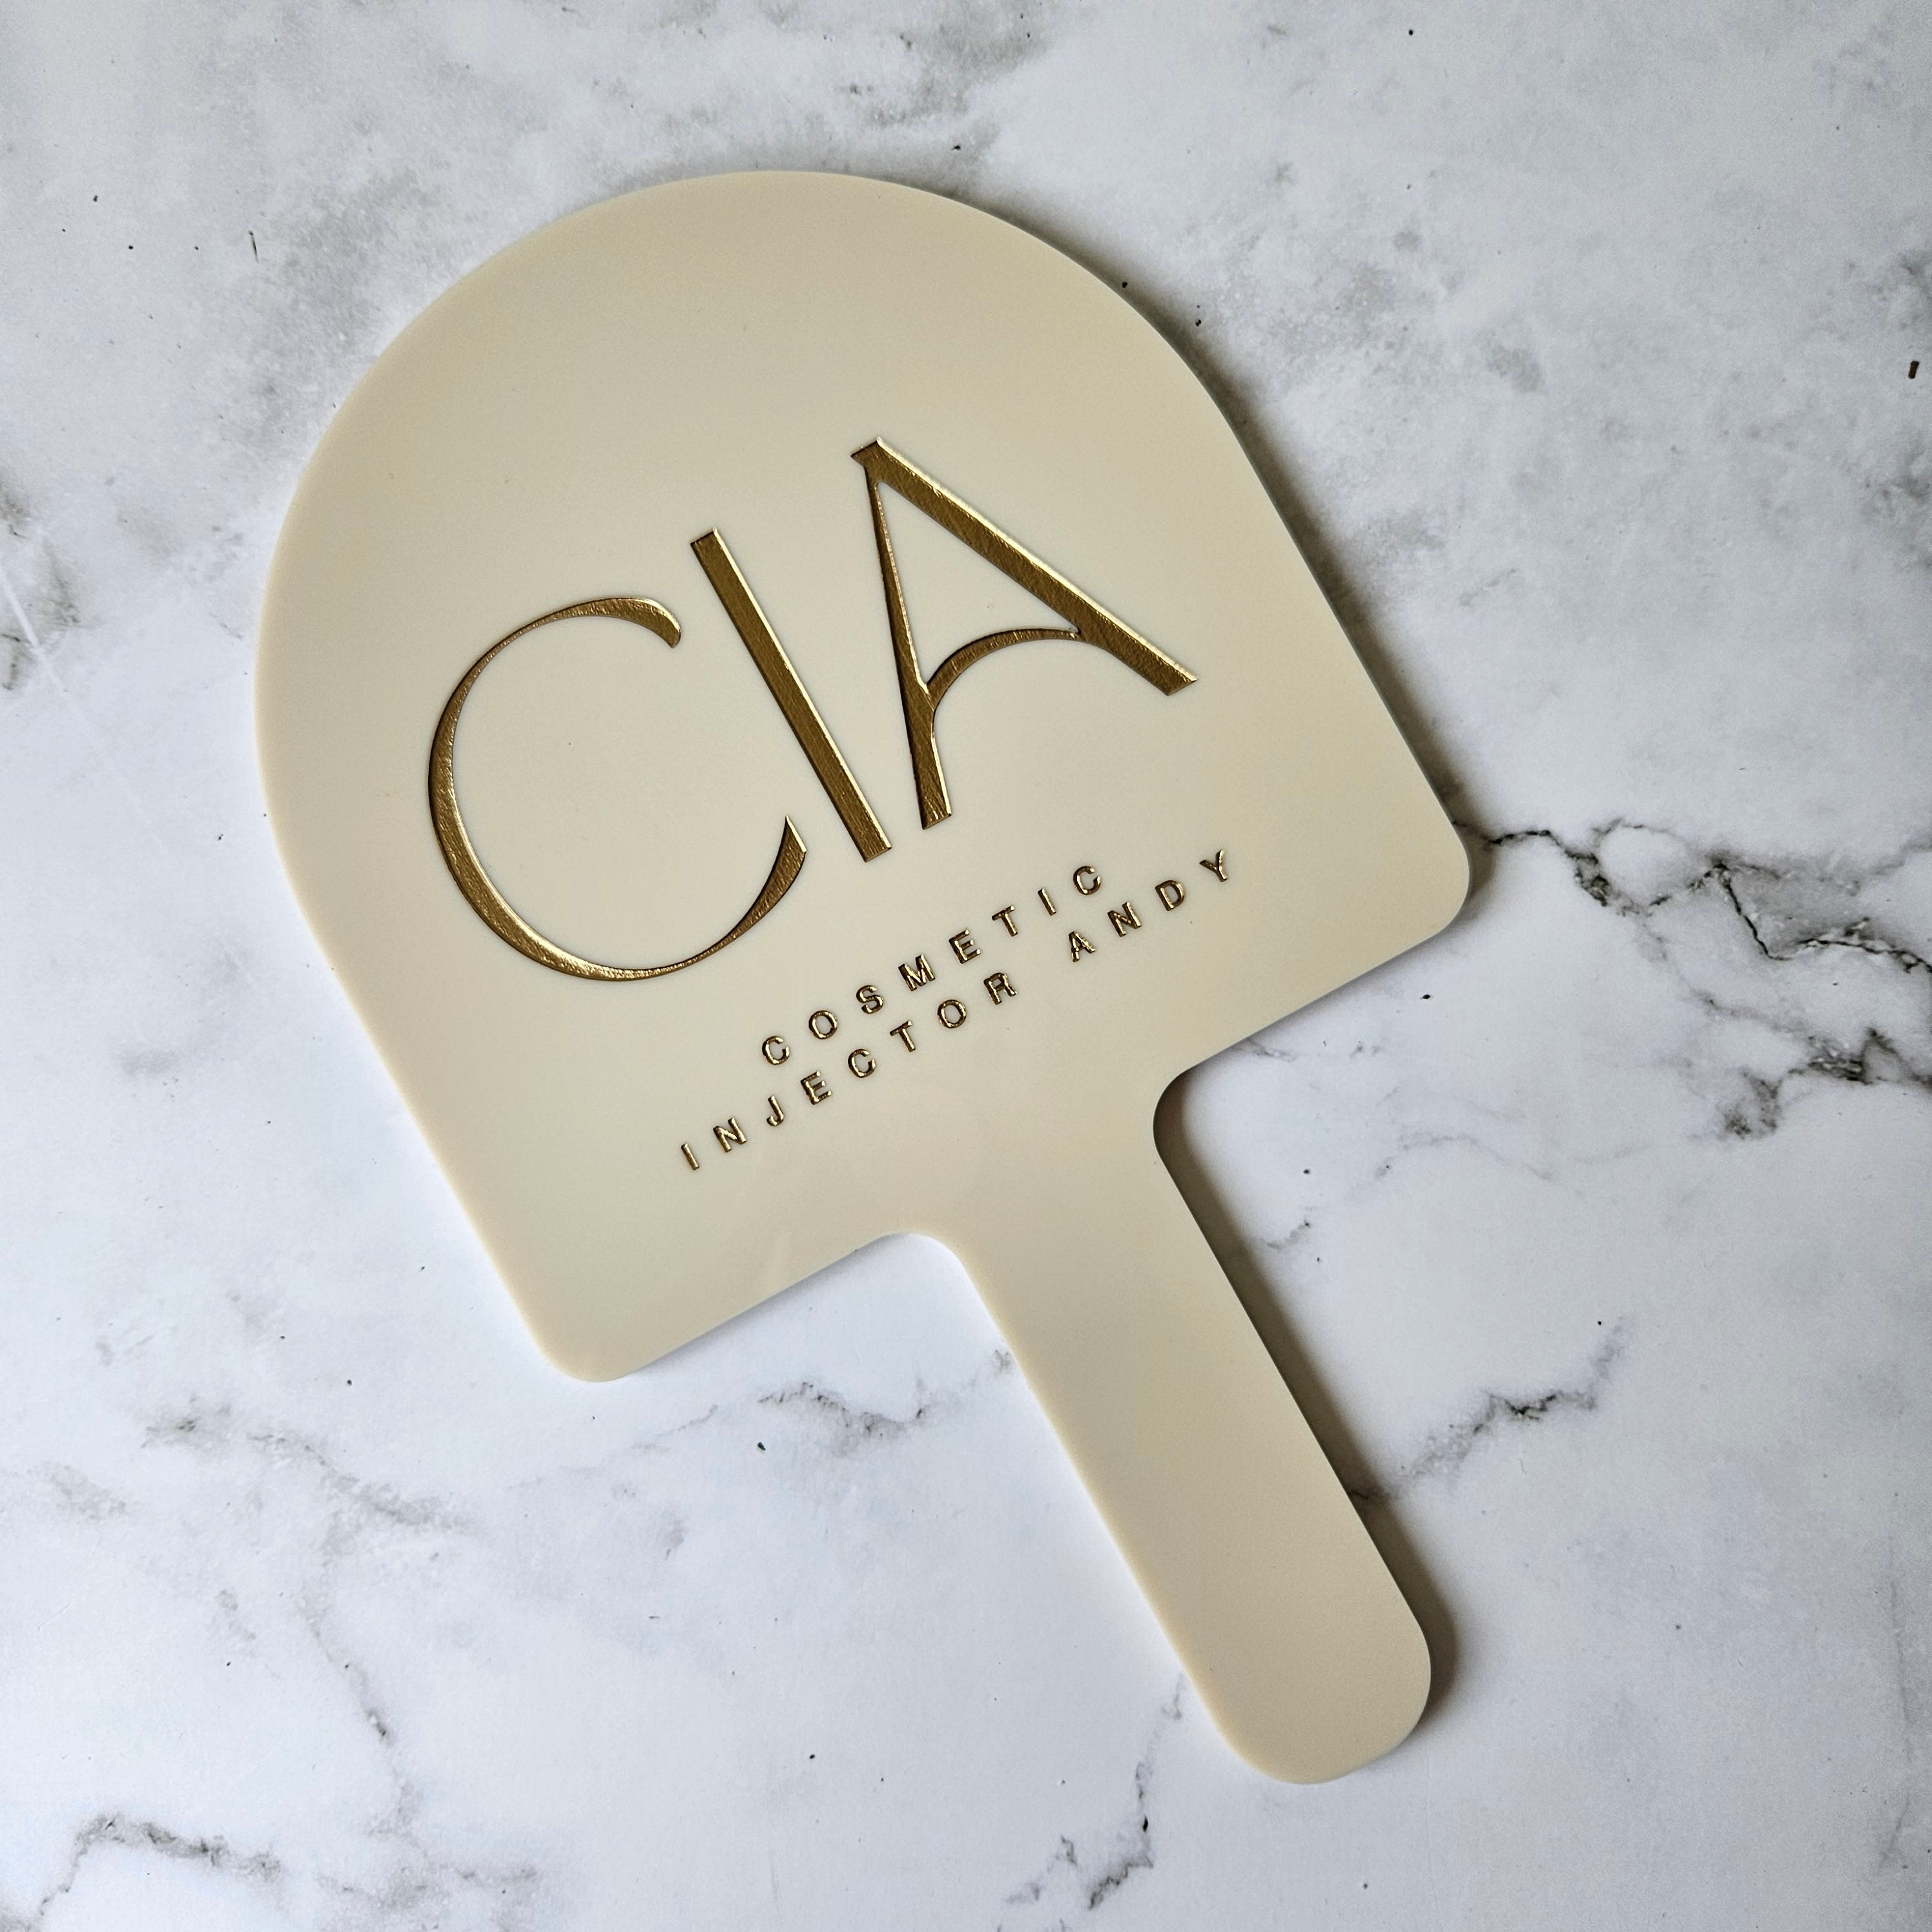 Custom Handheld Mirror with Logo for Injectable Clinic - Arch handheld mirror in beige acrylic with Gold logo